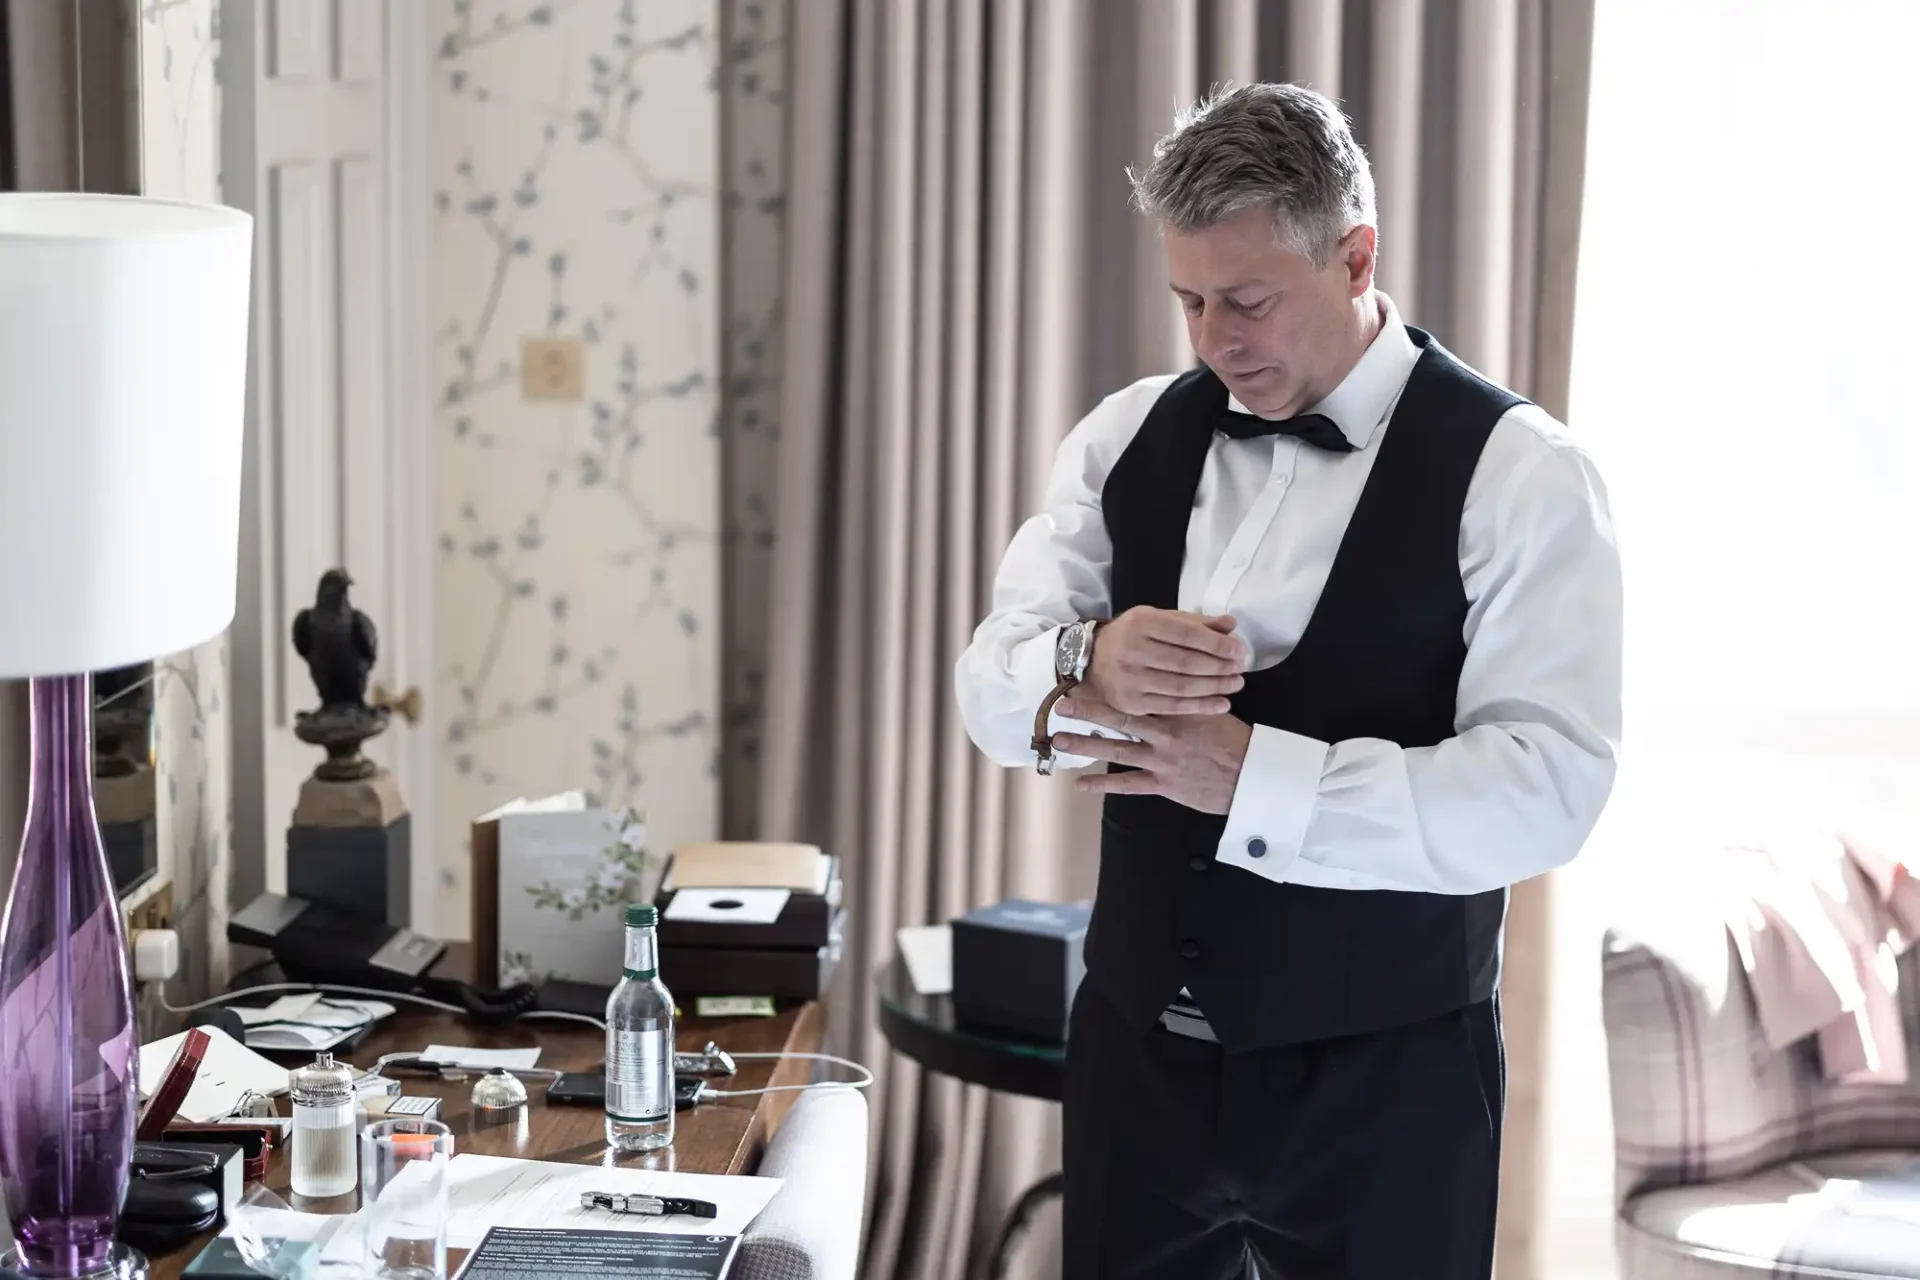 A man in a tuxedo adjusts his cufflinks in an elegantly furnished room with a desk and decor items.